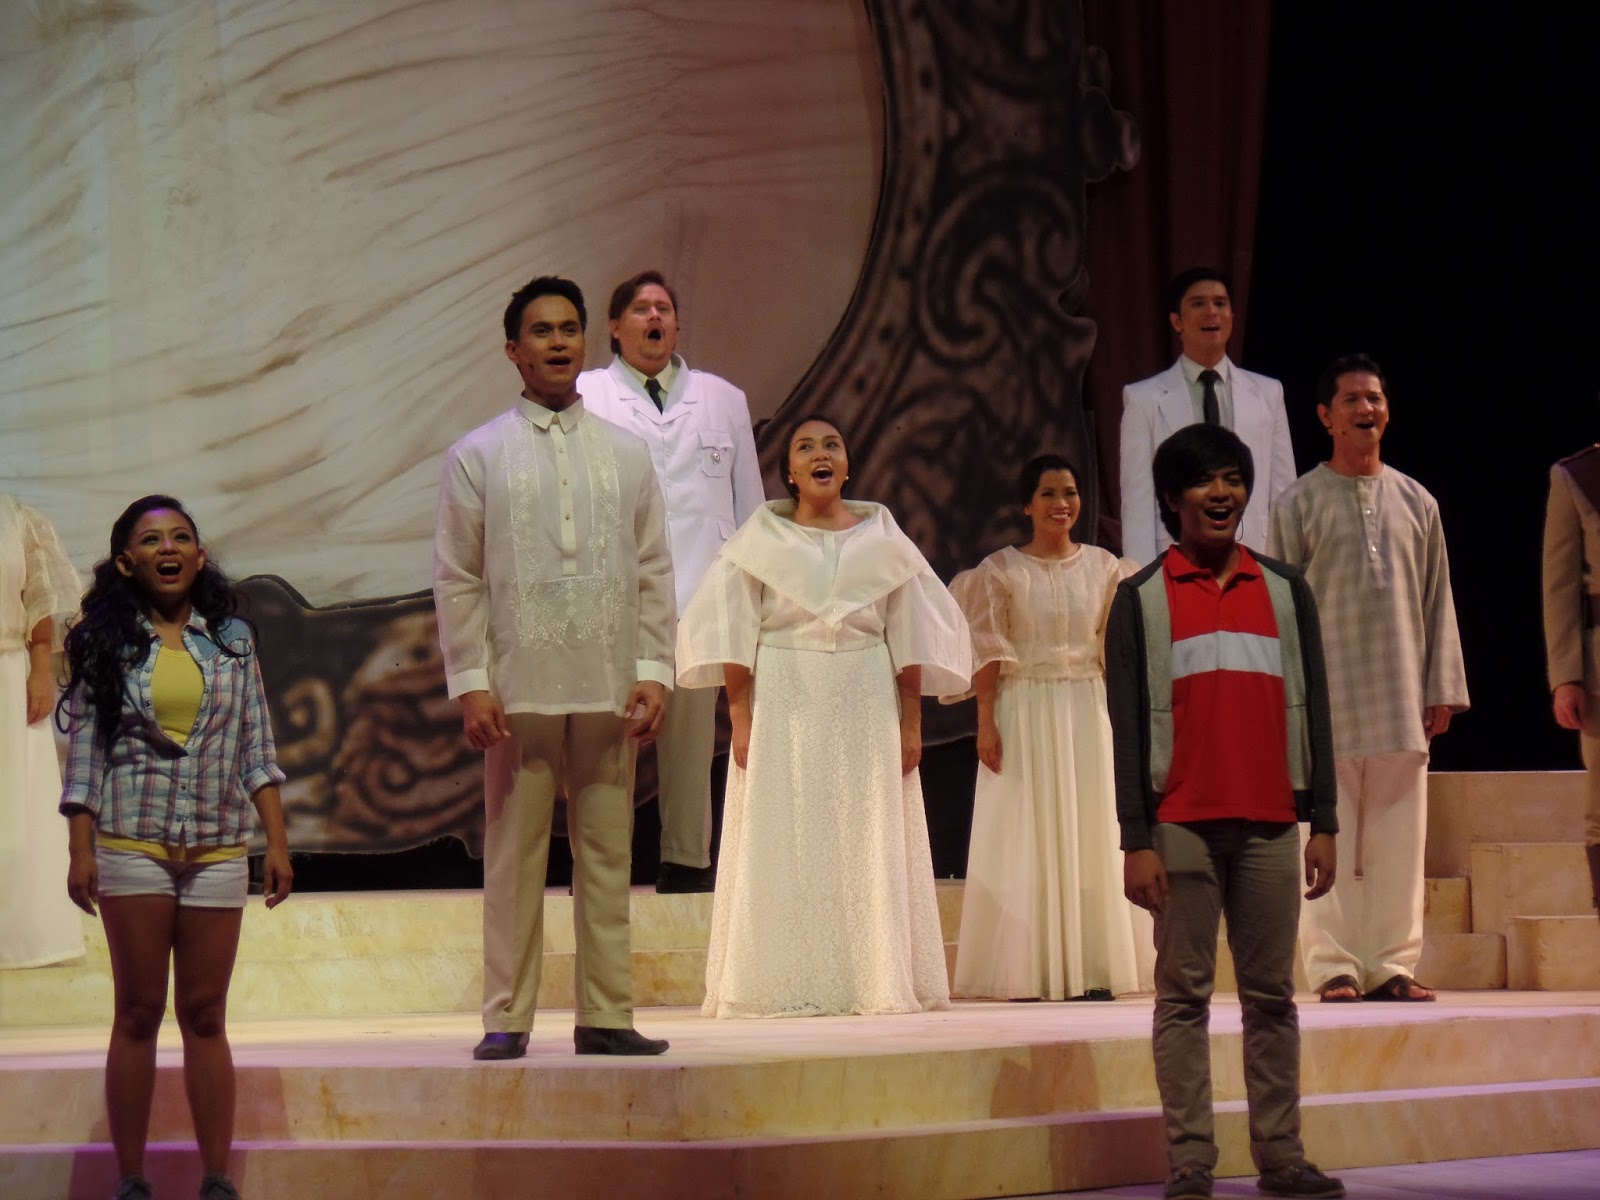 Fred Said: THEATER, CONCERTS, EVENTS: Review of PhilStagers' #POPEPULAR:  Pontifical Paradigms